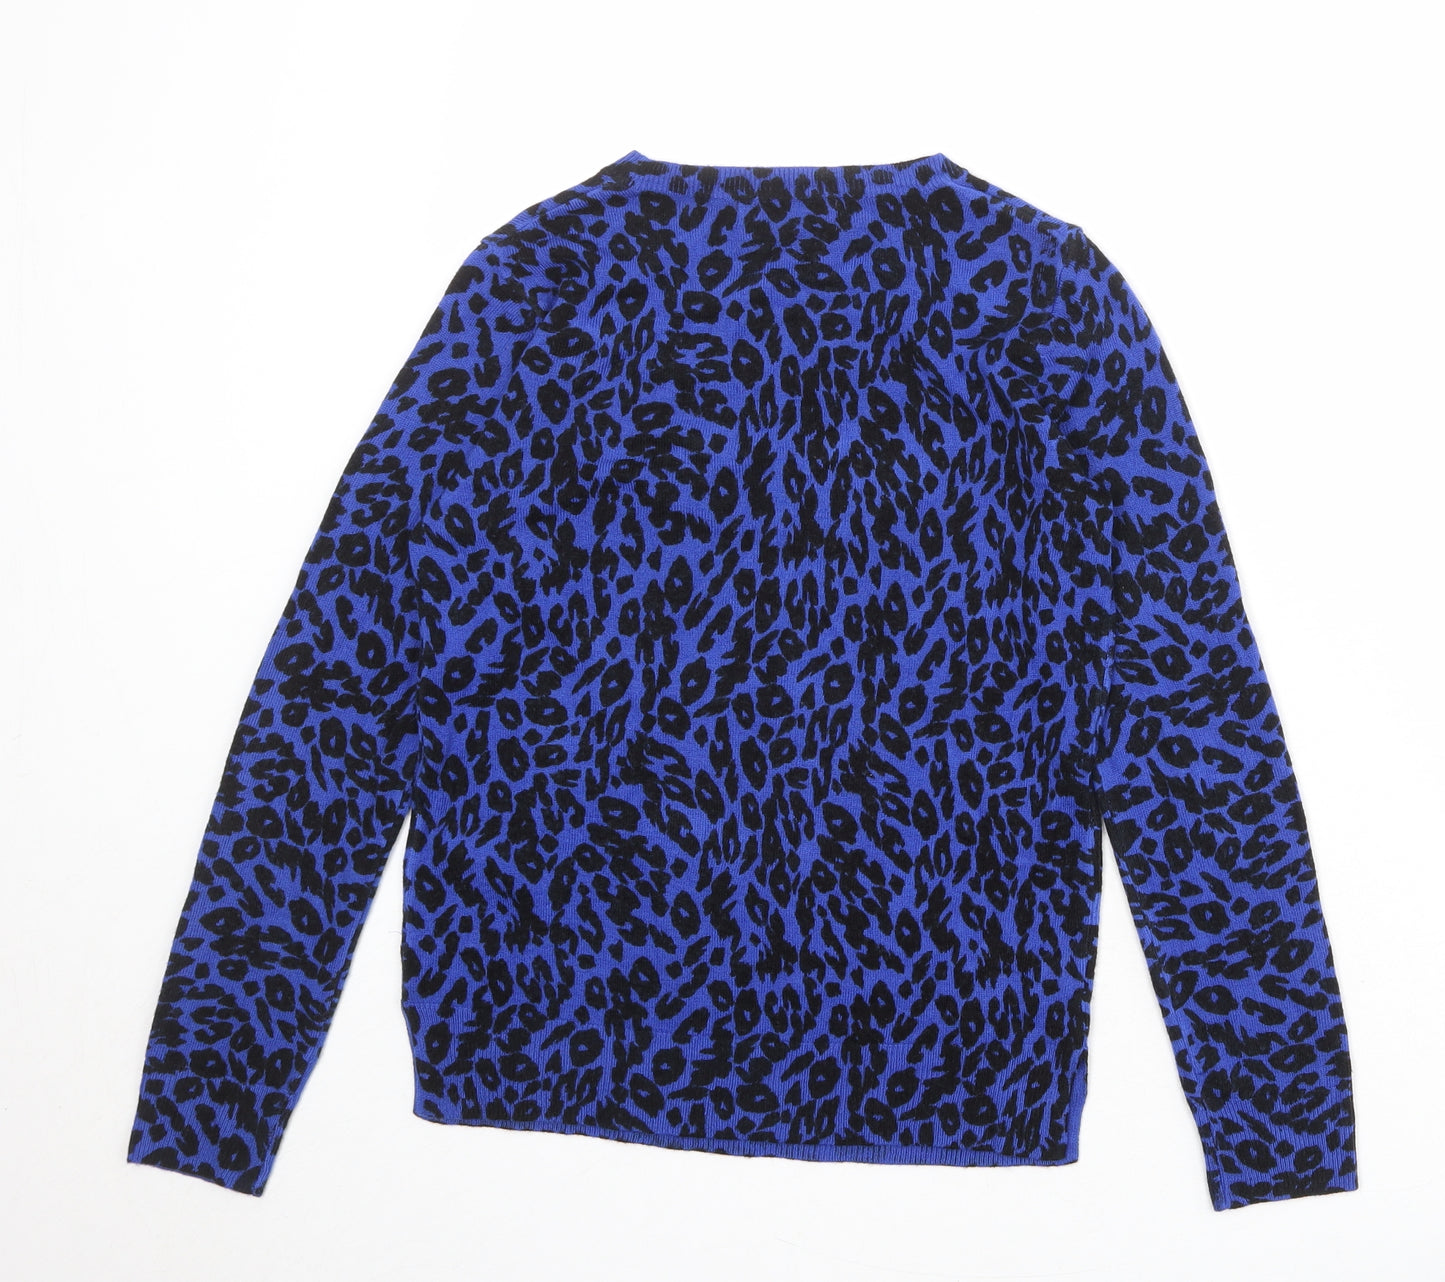 Marks and Spencer Womens Blue Round Neck Animal Print Acrylic Pullover Jumper Size 8 - Leopard Print